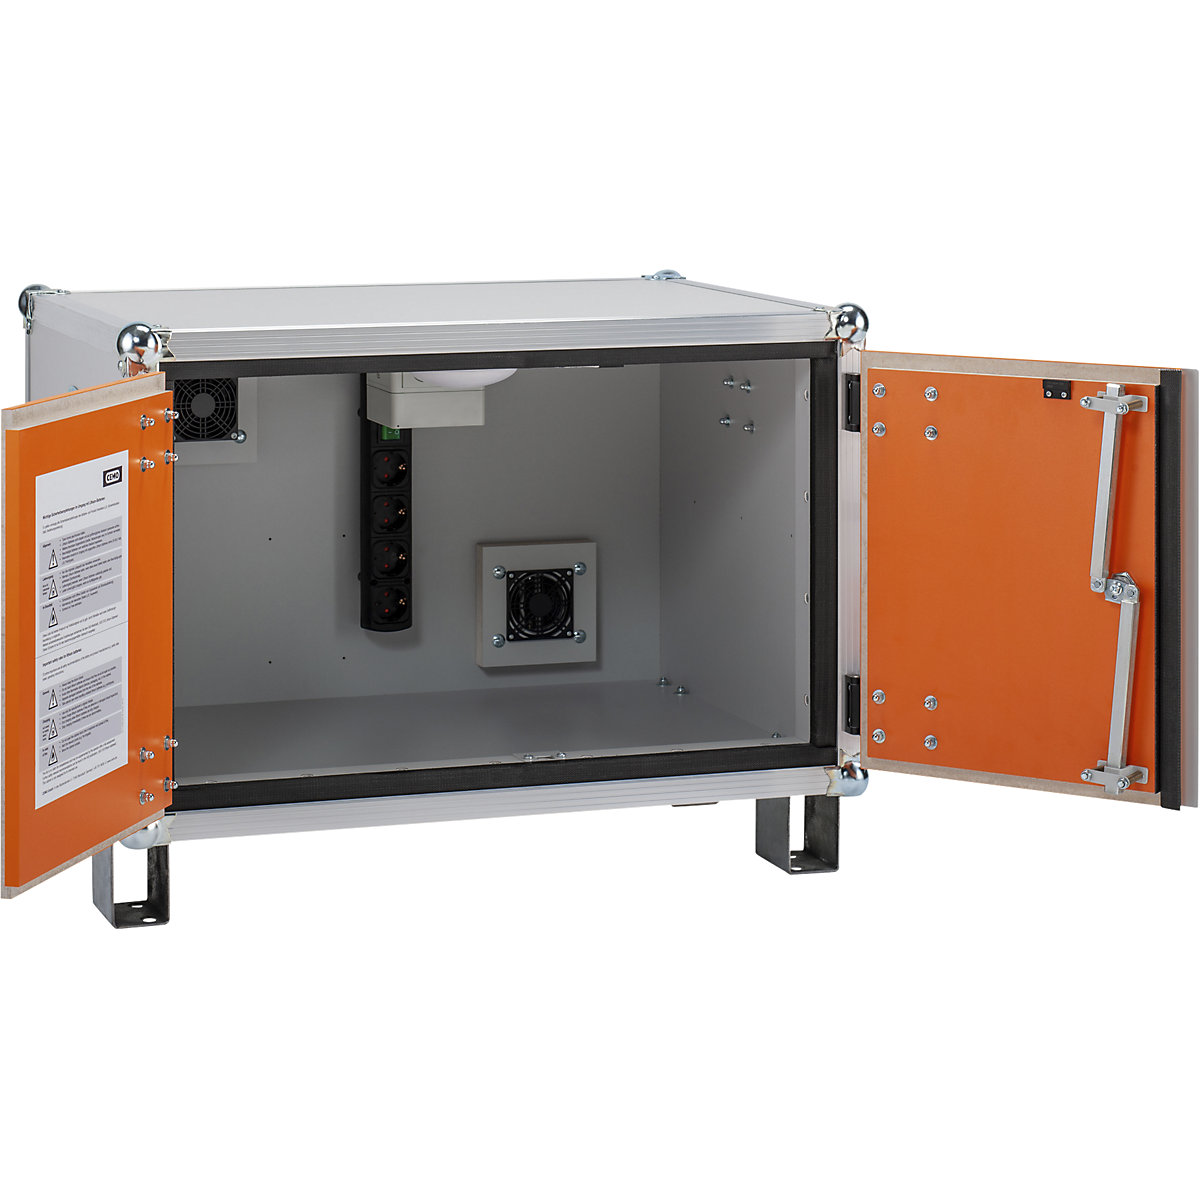 BASIC safety battery charging cabinet - CEMO